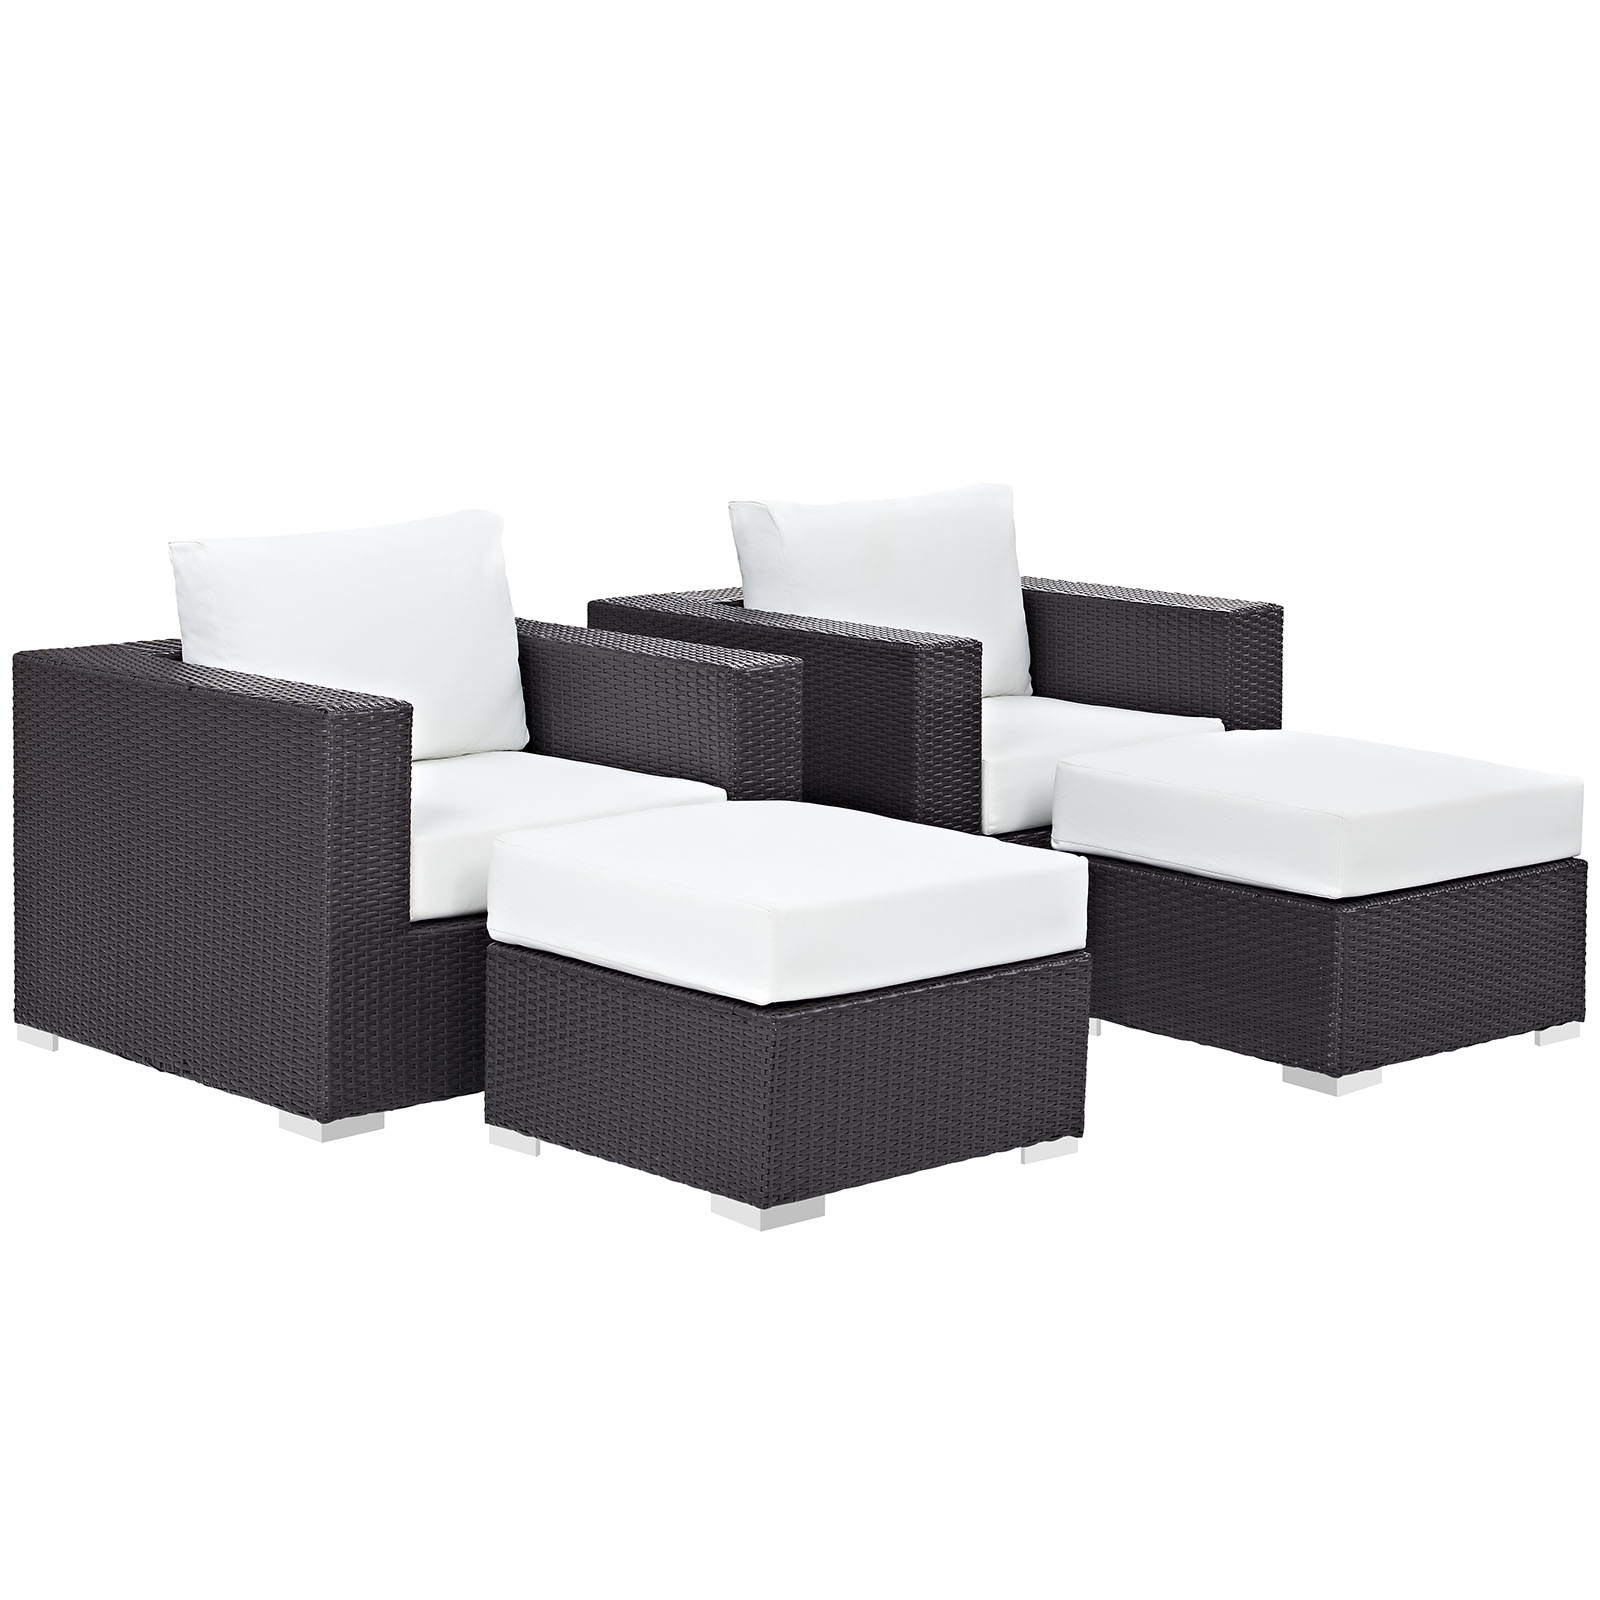 Modway Convene 4 Piece Outdoor Patio Sectional Set in Espresso White - image 3 of 6